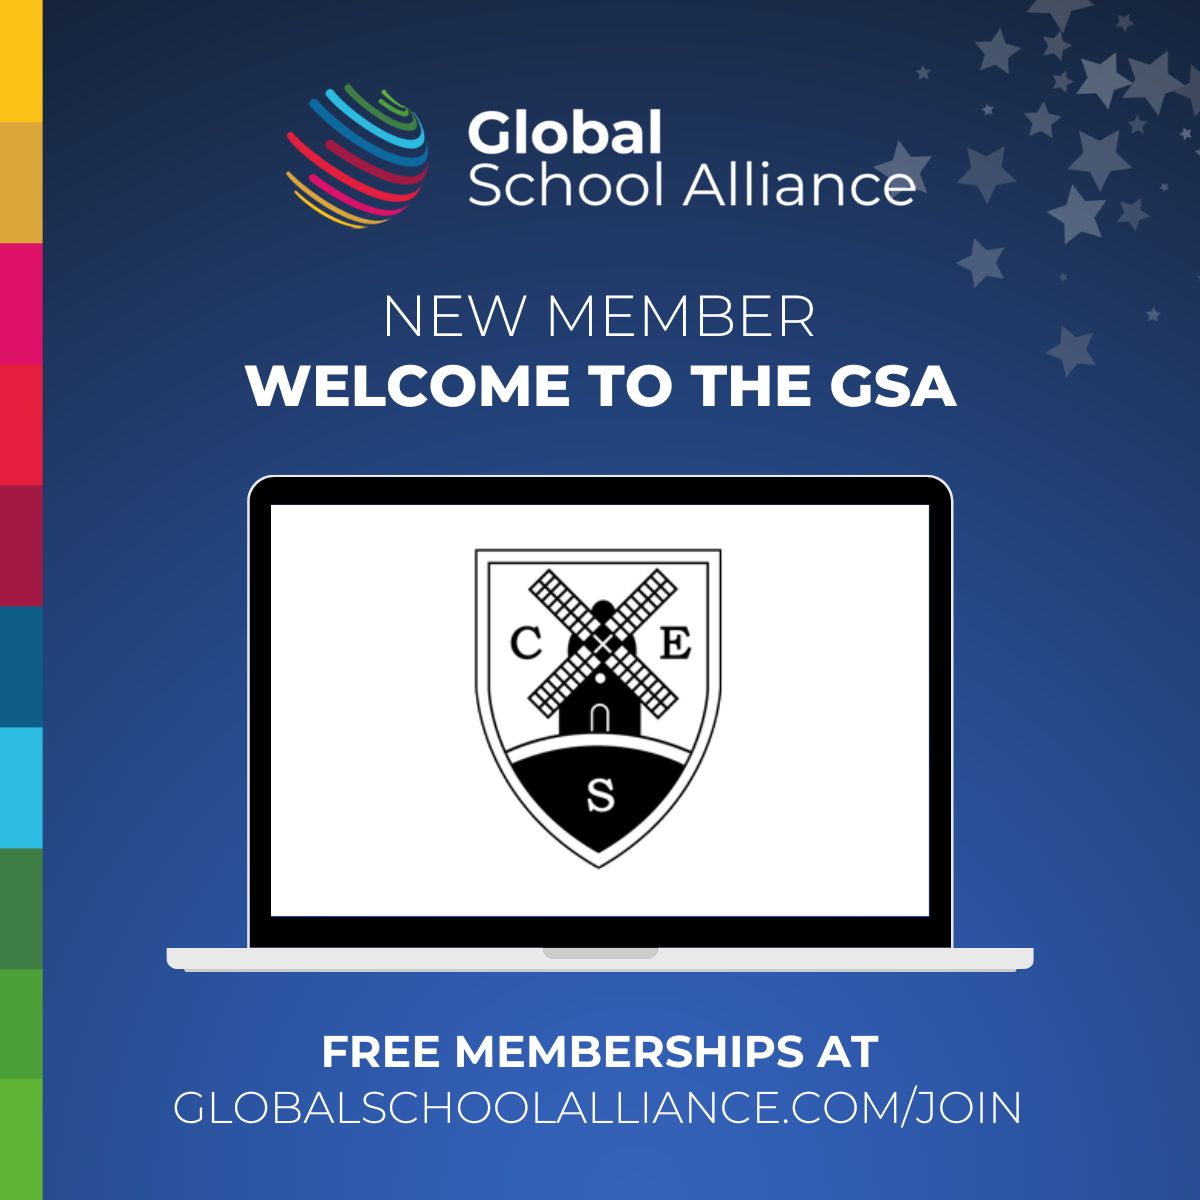 Welcome to the GSA, @skidbyschool! 👋🌍 As a Member, schools can connect and collaborate across more than 130 countries worldwide. Join for free and start connecting today: globalschoolalliance.com/join.